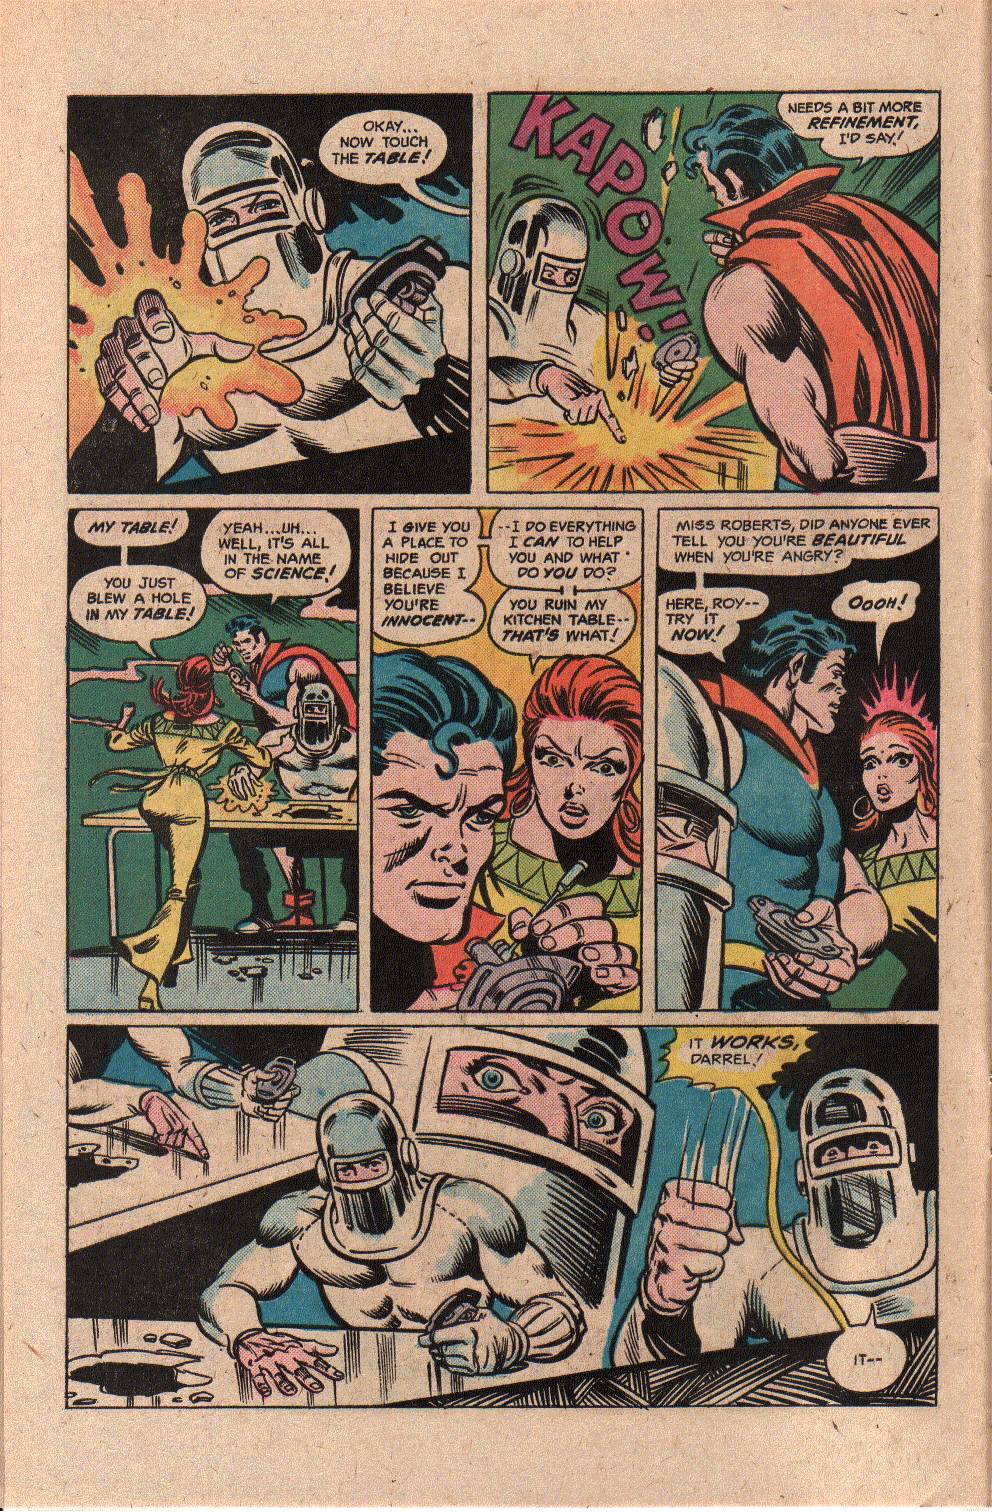 Freedom Fighters (1976) Issue #6 #6 - English 10